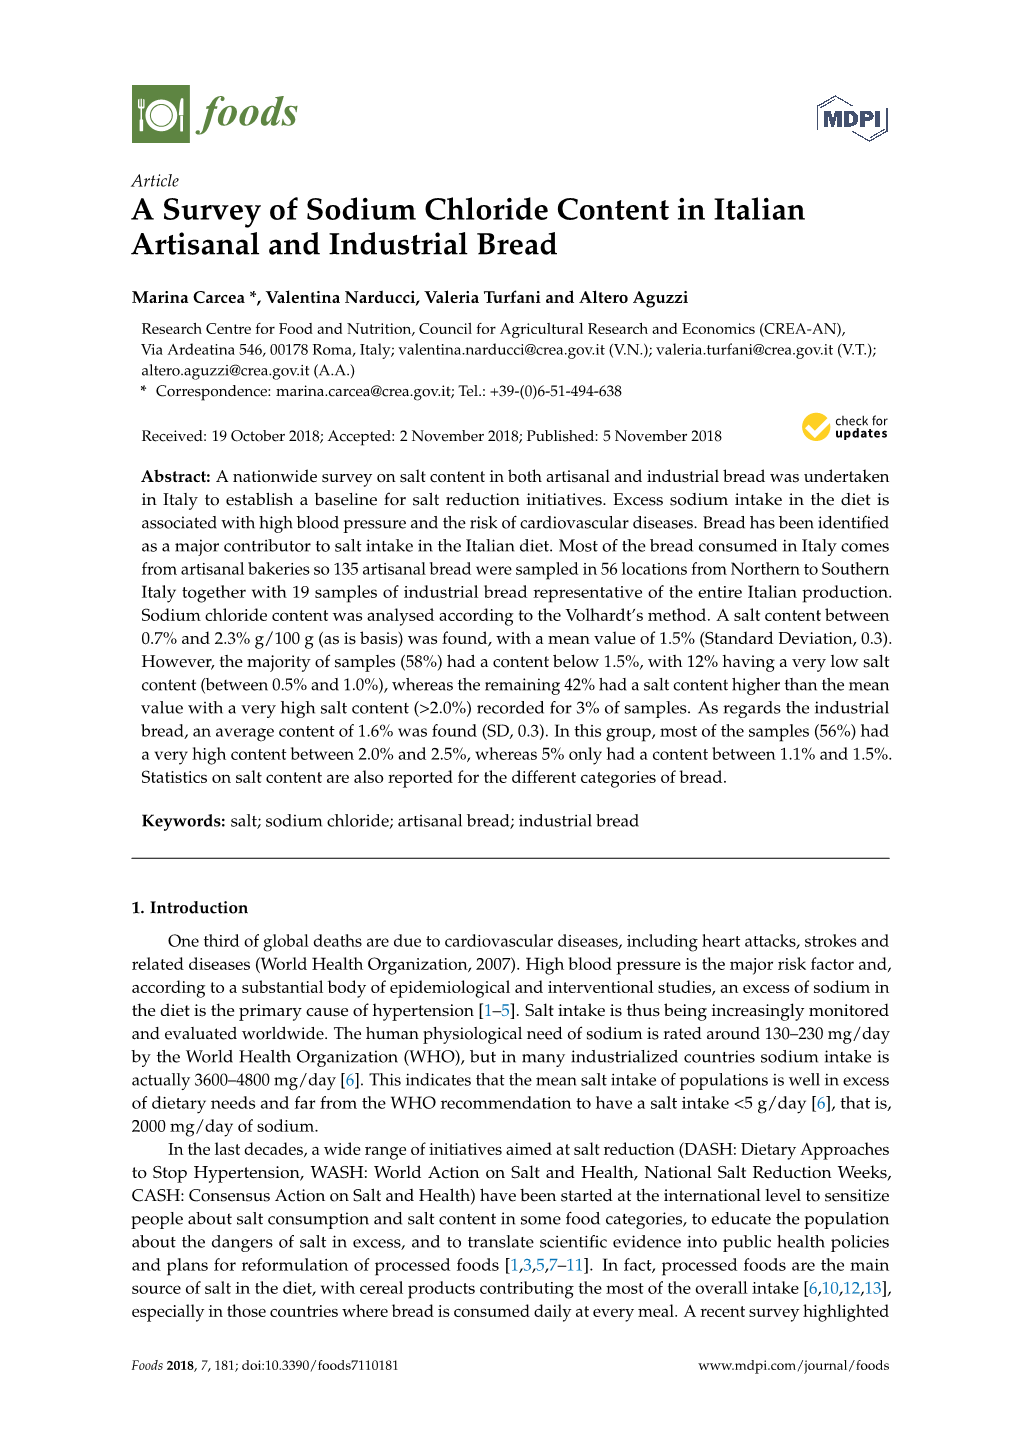 A Survey of Sodium Chloride Content in Italian Artisanal and Industrial Bread